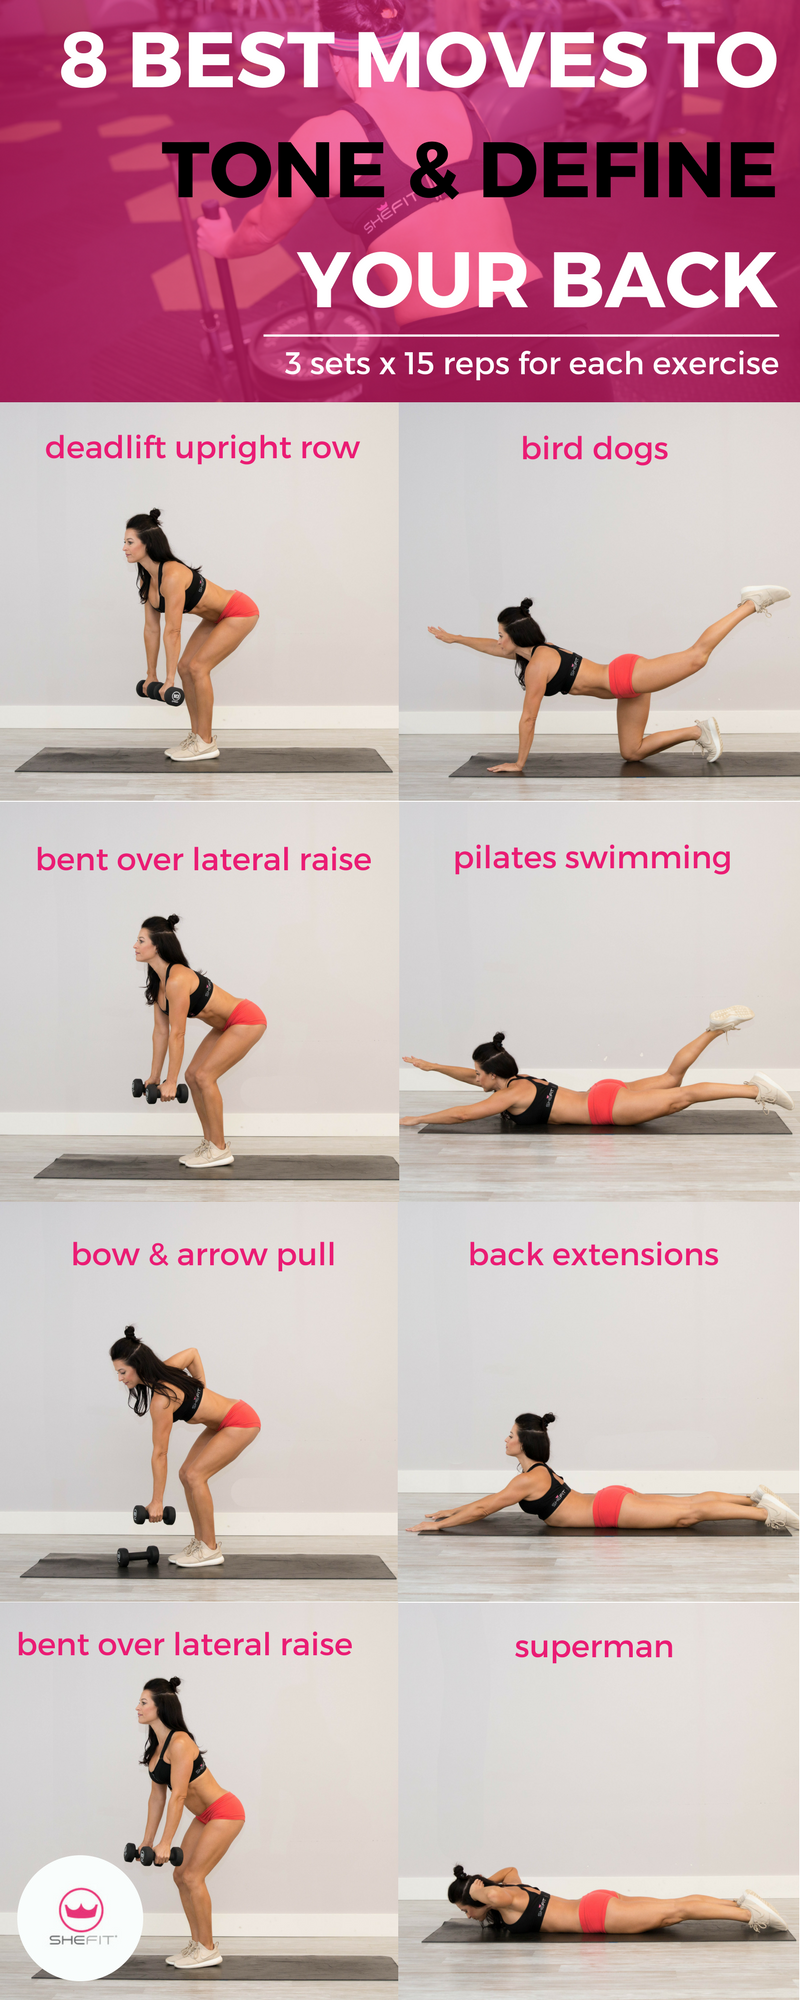 8 Awesome Exercises Back at Home